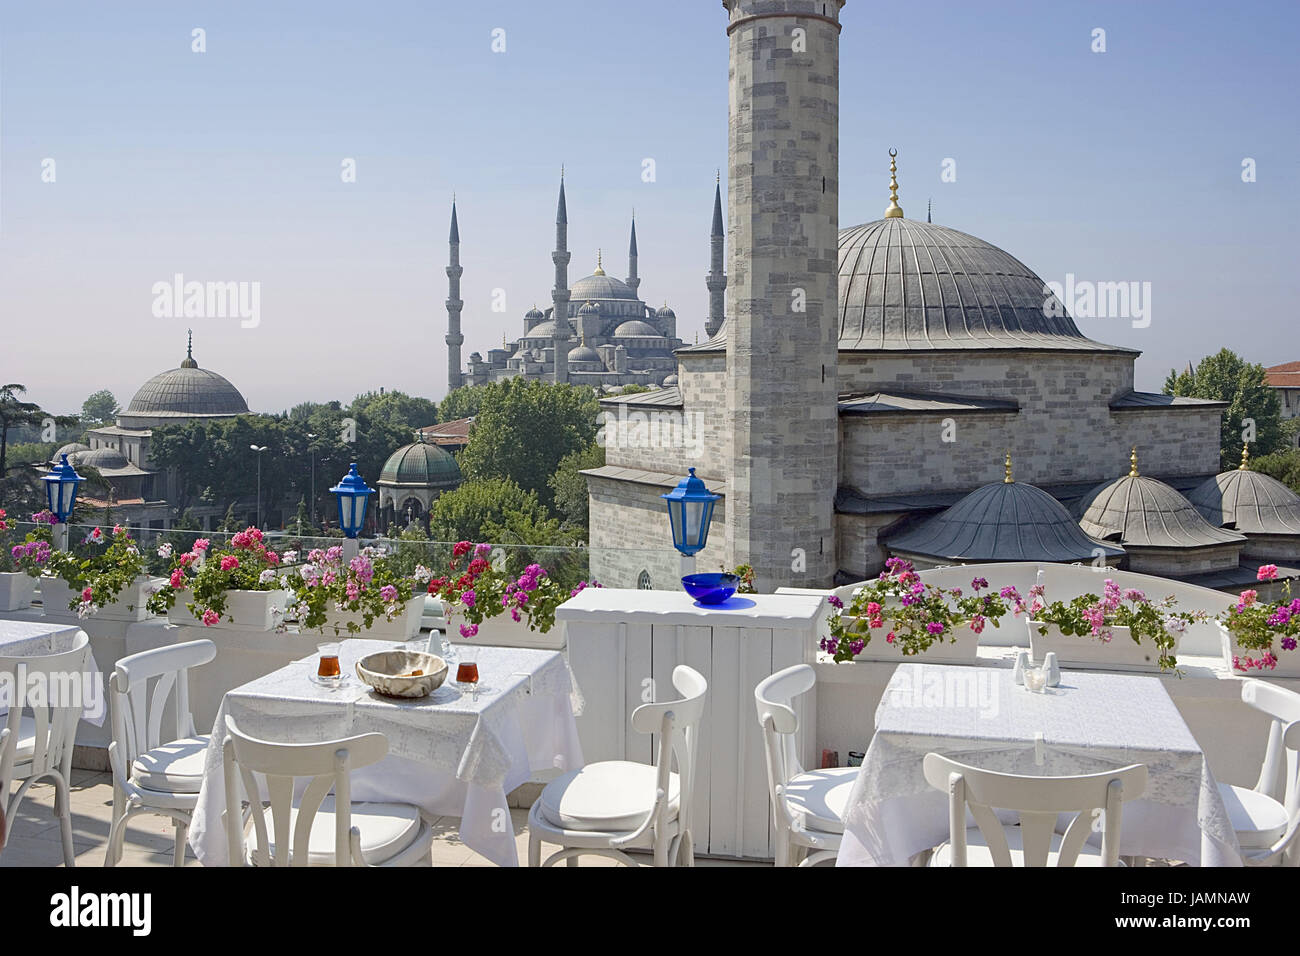 Turkey,Istanbul,Firuz Aga Mosque,sultan Ahmet Camii,'blue mosque',roof terrace,detail,town,city,metropolis,port,culture,faith,religion,Islam,structures,historically,architecture,church,sacred construction,Sultan-Ahmet-Camii,sultan's Ahmed's mosque,mosques,domed building,towers,landmarks,places of interest,minarets,domes,restaurant,terrace,outside,deserted, Stock Photo